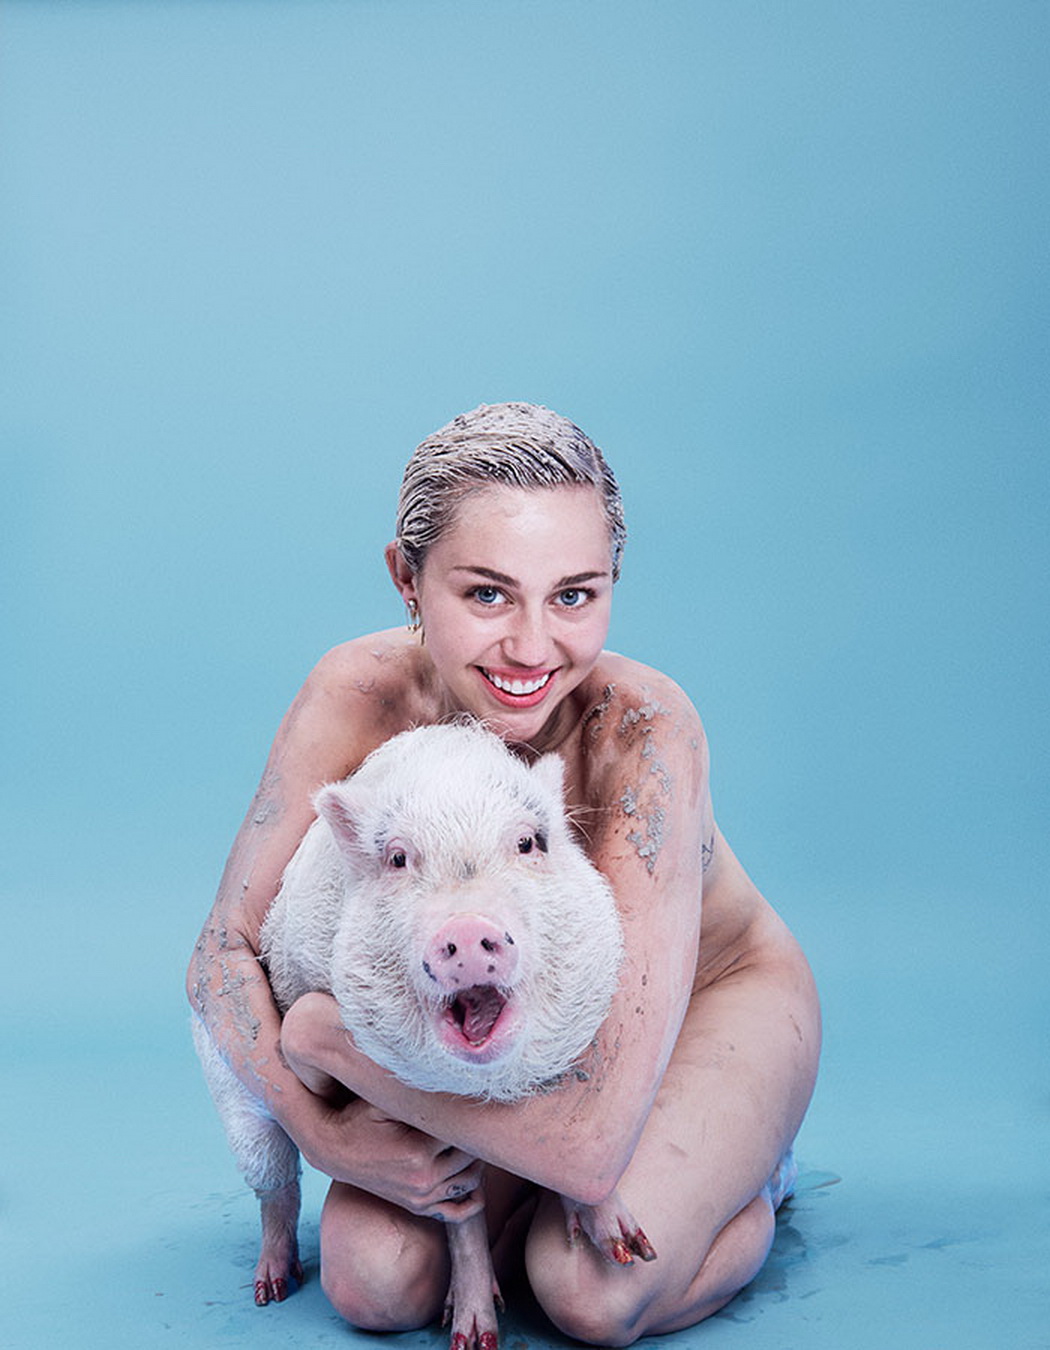 Miley Cyrus nude for Paper Magazine 2015 Summer issue 10x HQ 12.jpg